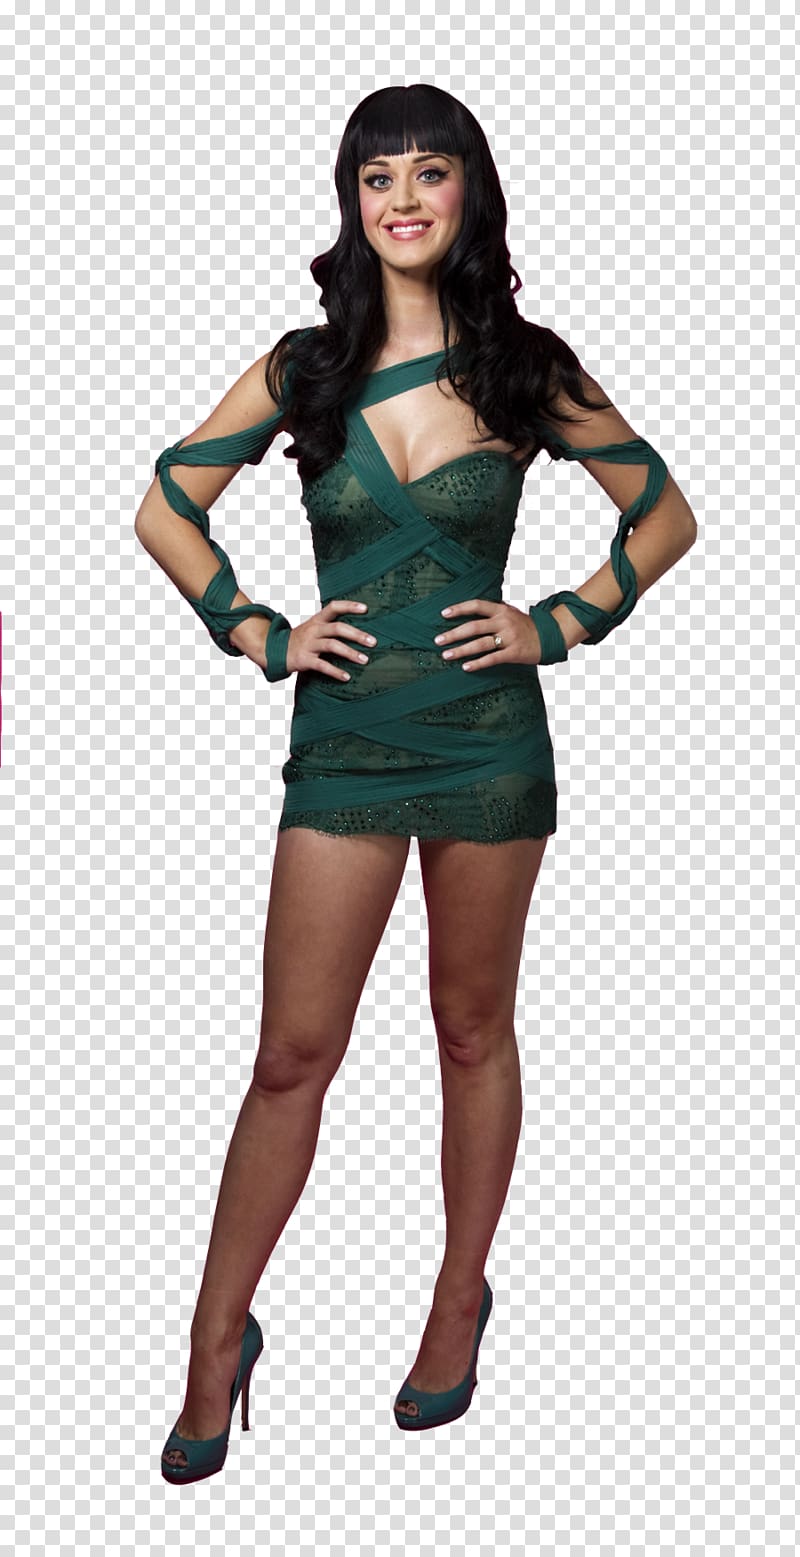 Katy Perry Costume Sleeve Clothing Part of Me, katy perry transparent background PNG clipart